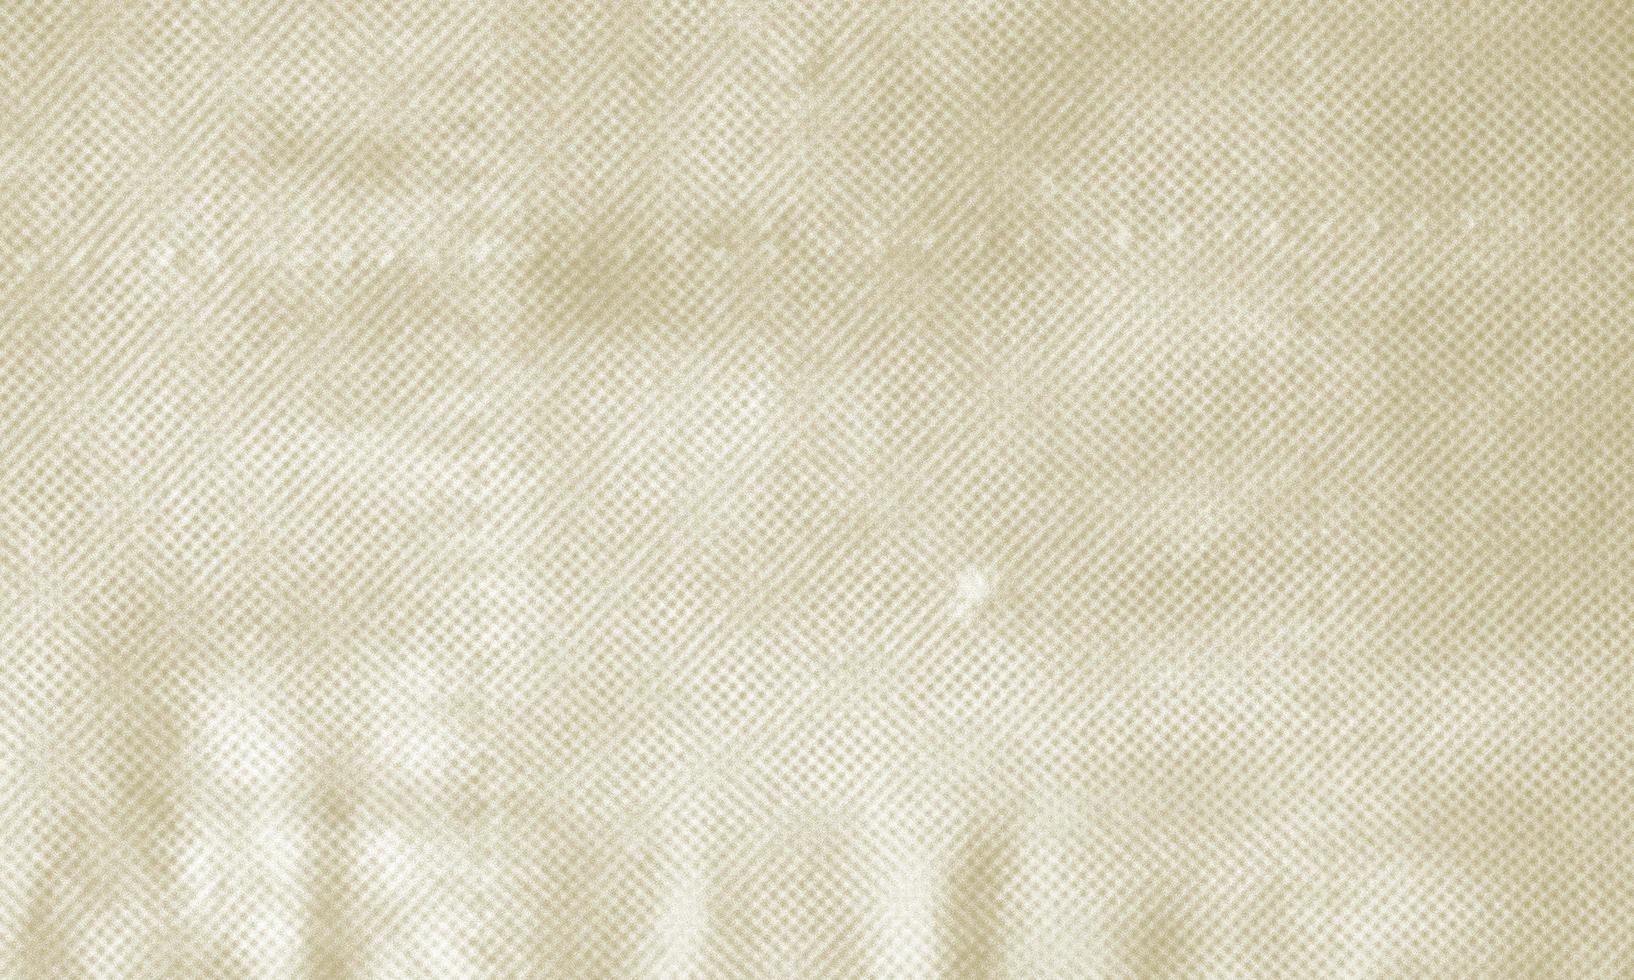 Vegas Gold wrinkled fabric texture for background photo